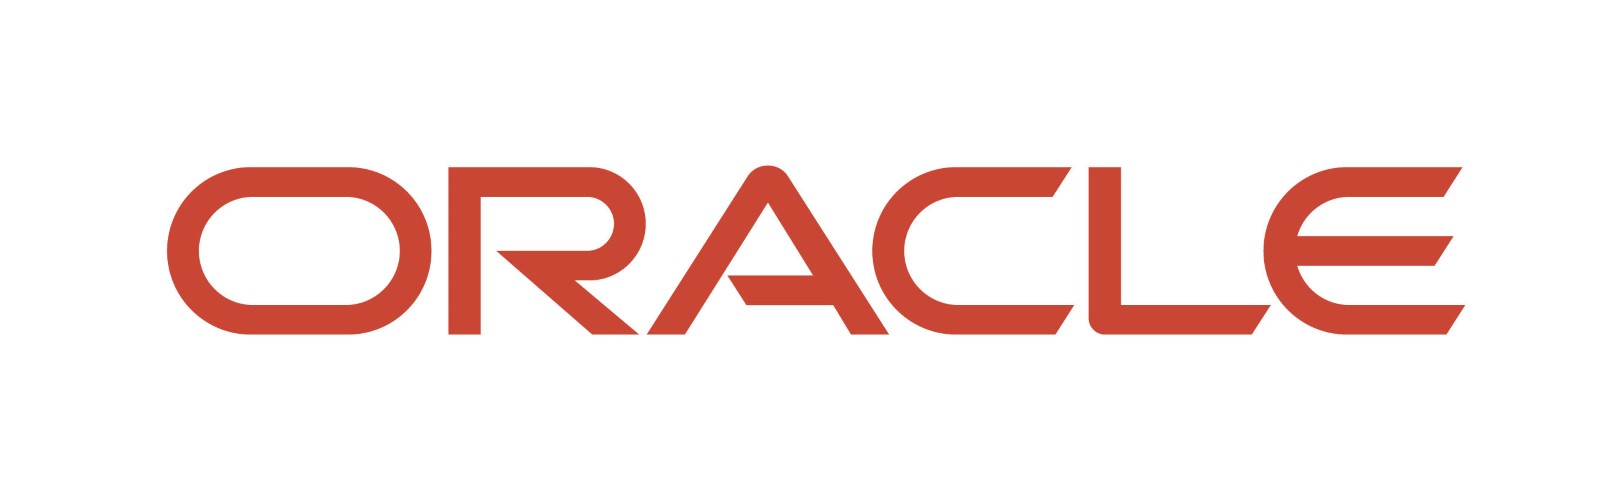 Tata Motors Drives Sales Excellence with Oracle Cloud Infrastructure